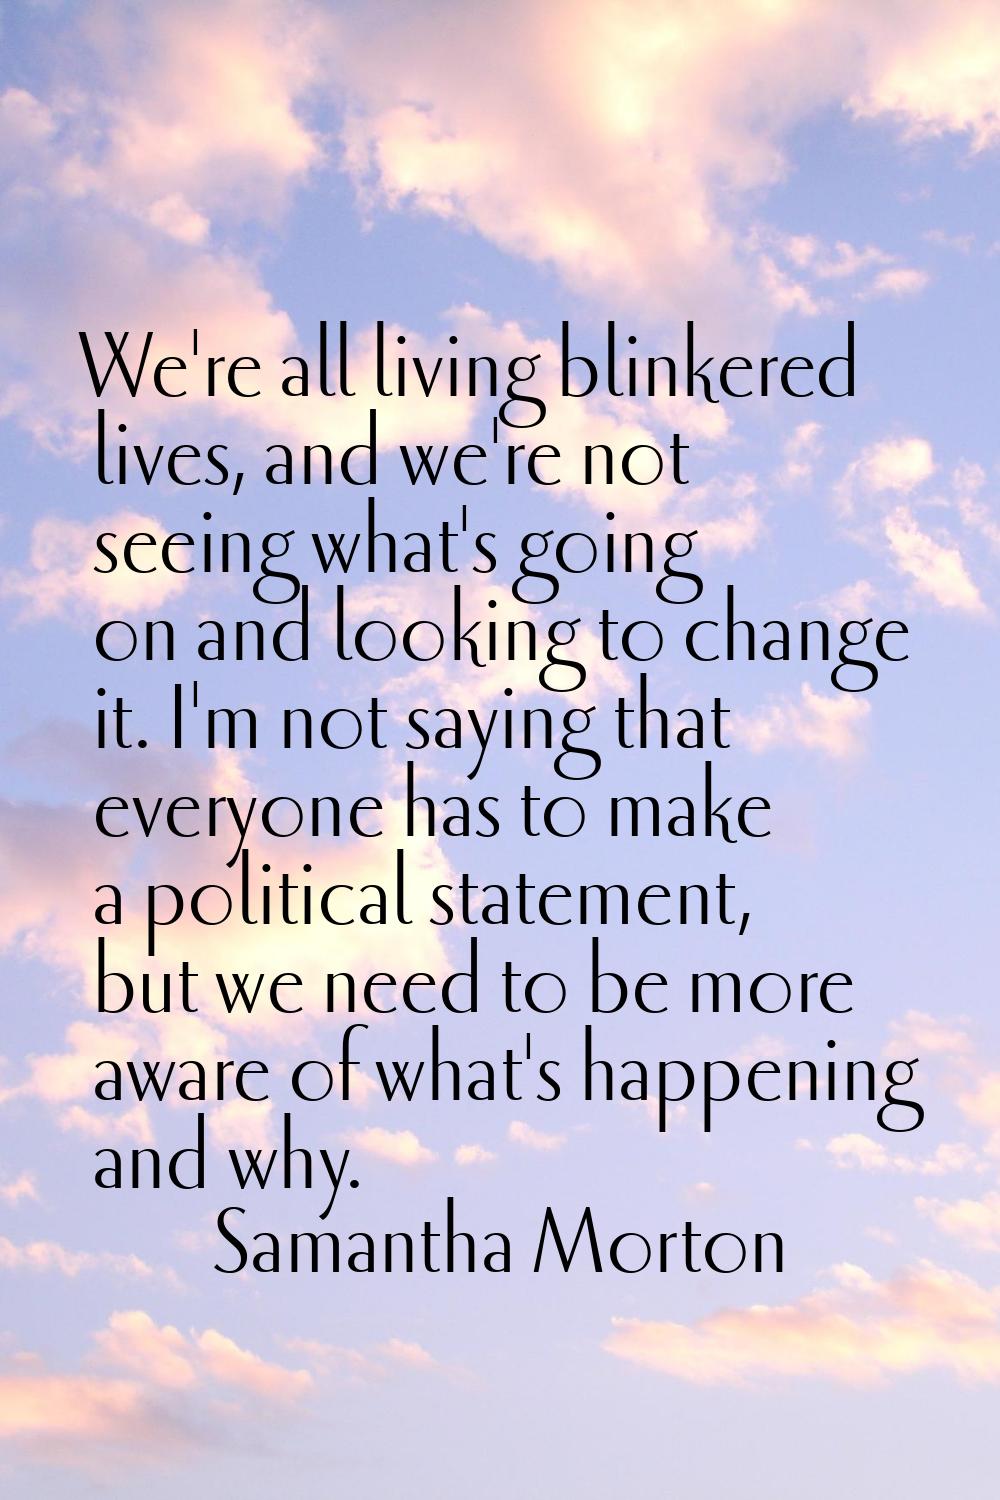 We're all living blinkered lives, and we're not seeing what's going on and looking to change it. I'